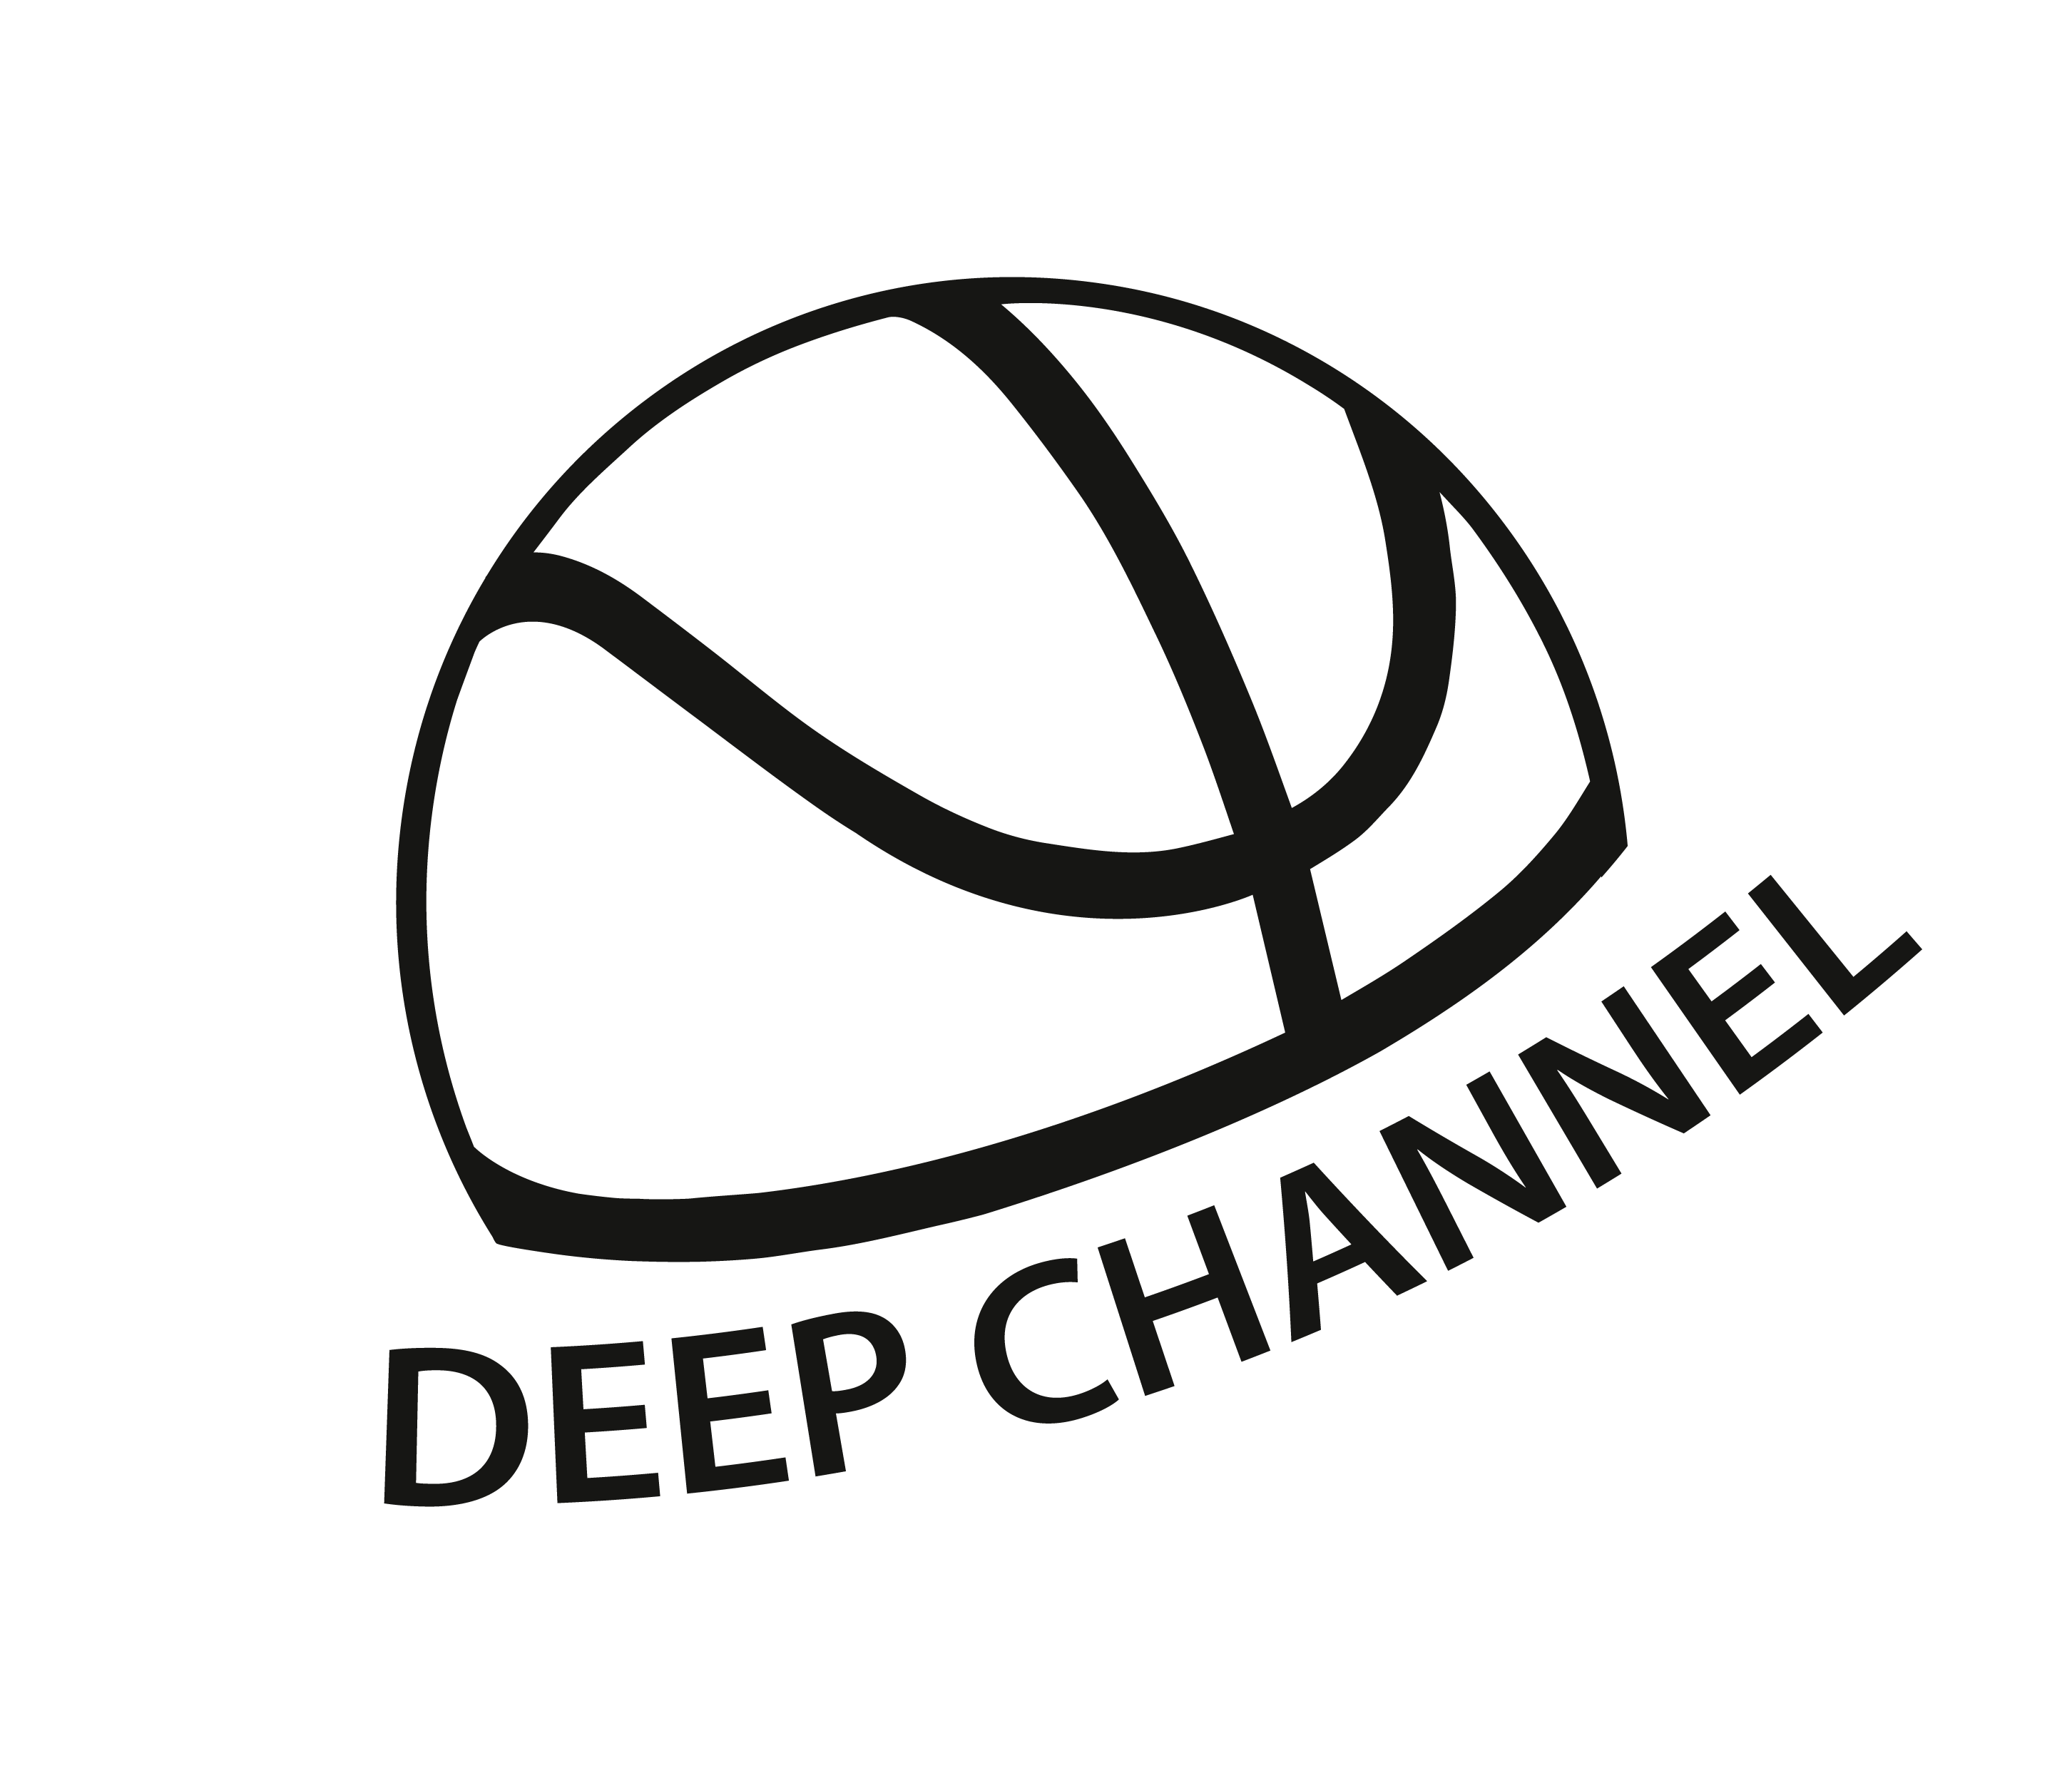 Deep Channel.png